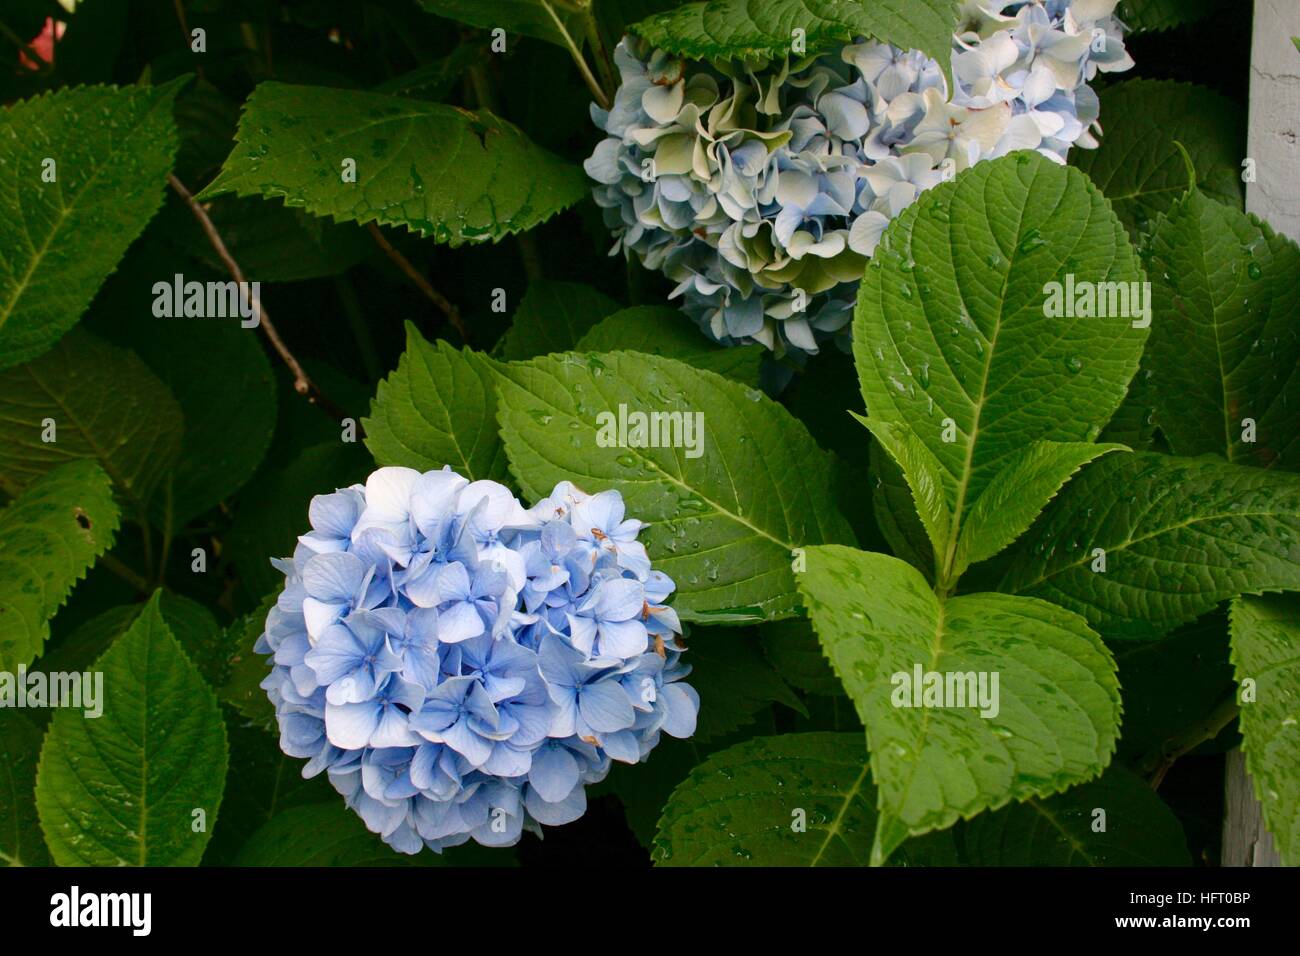 Blue Hydrangea Flower With Green Leaves And Water Droplets Stock